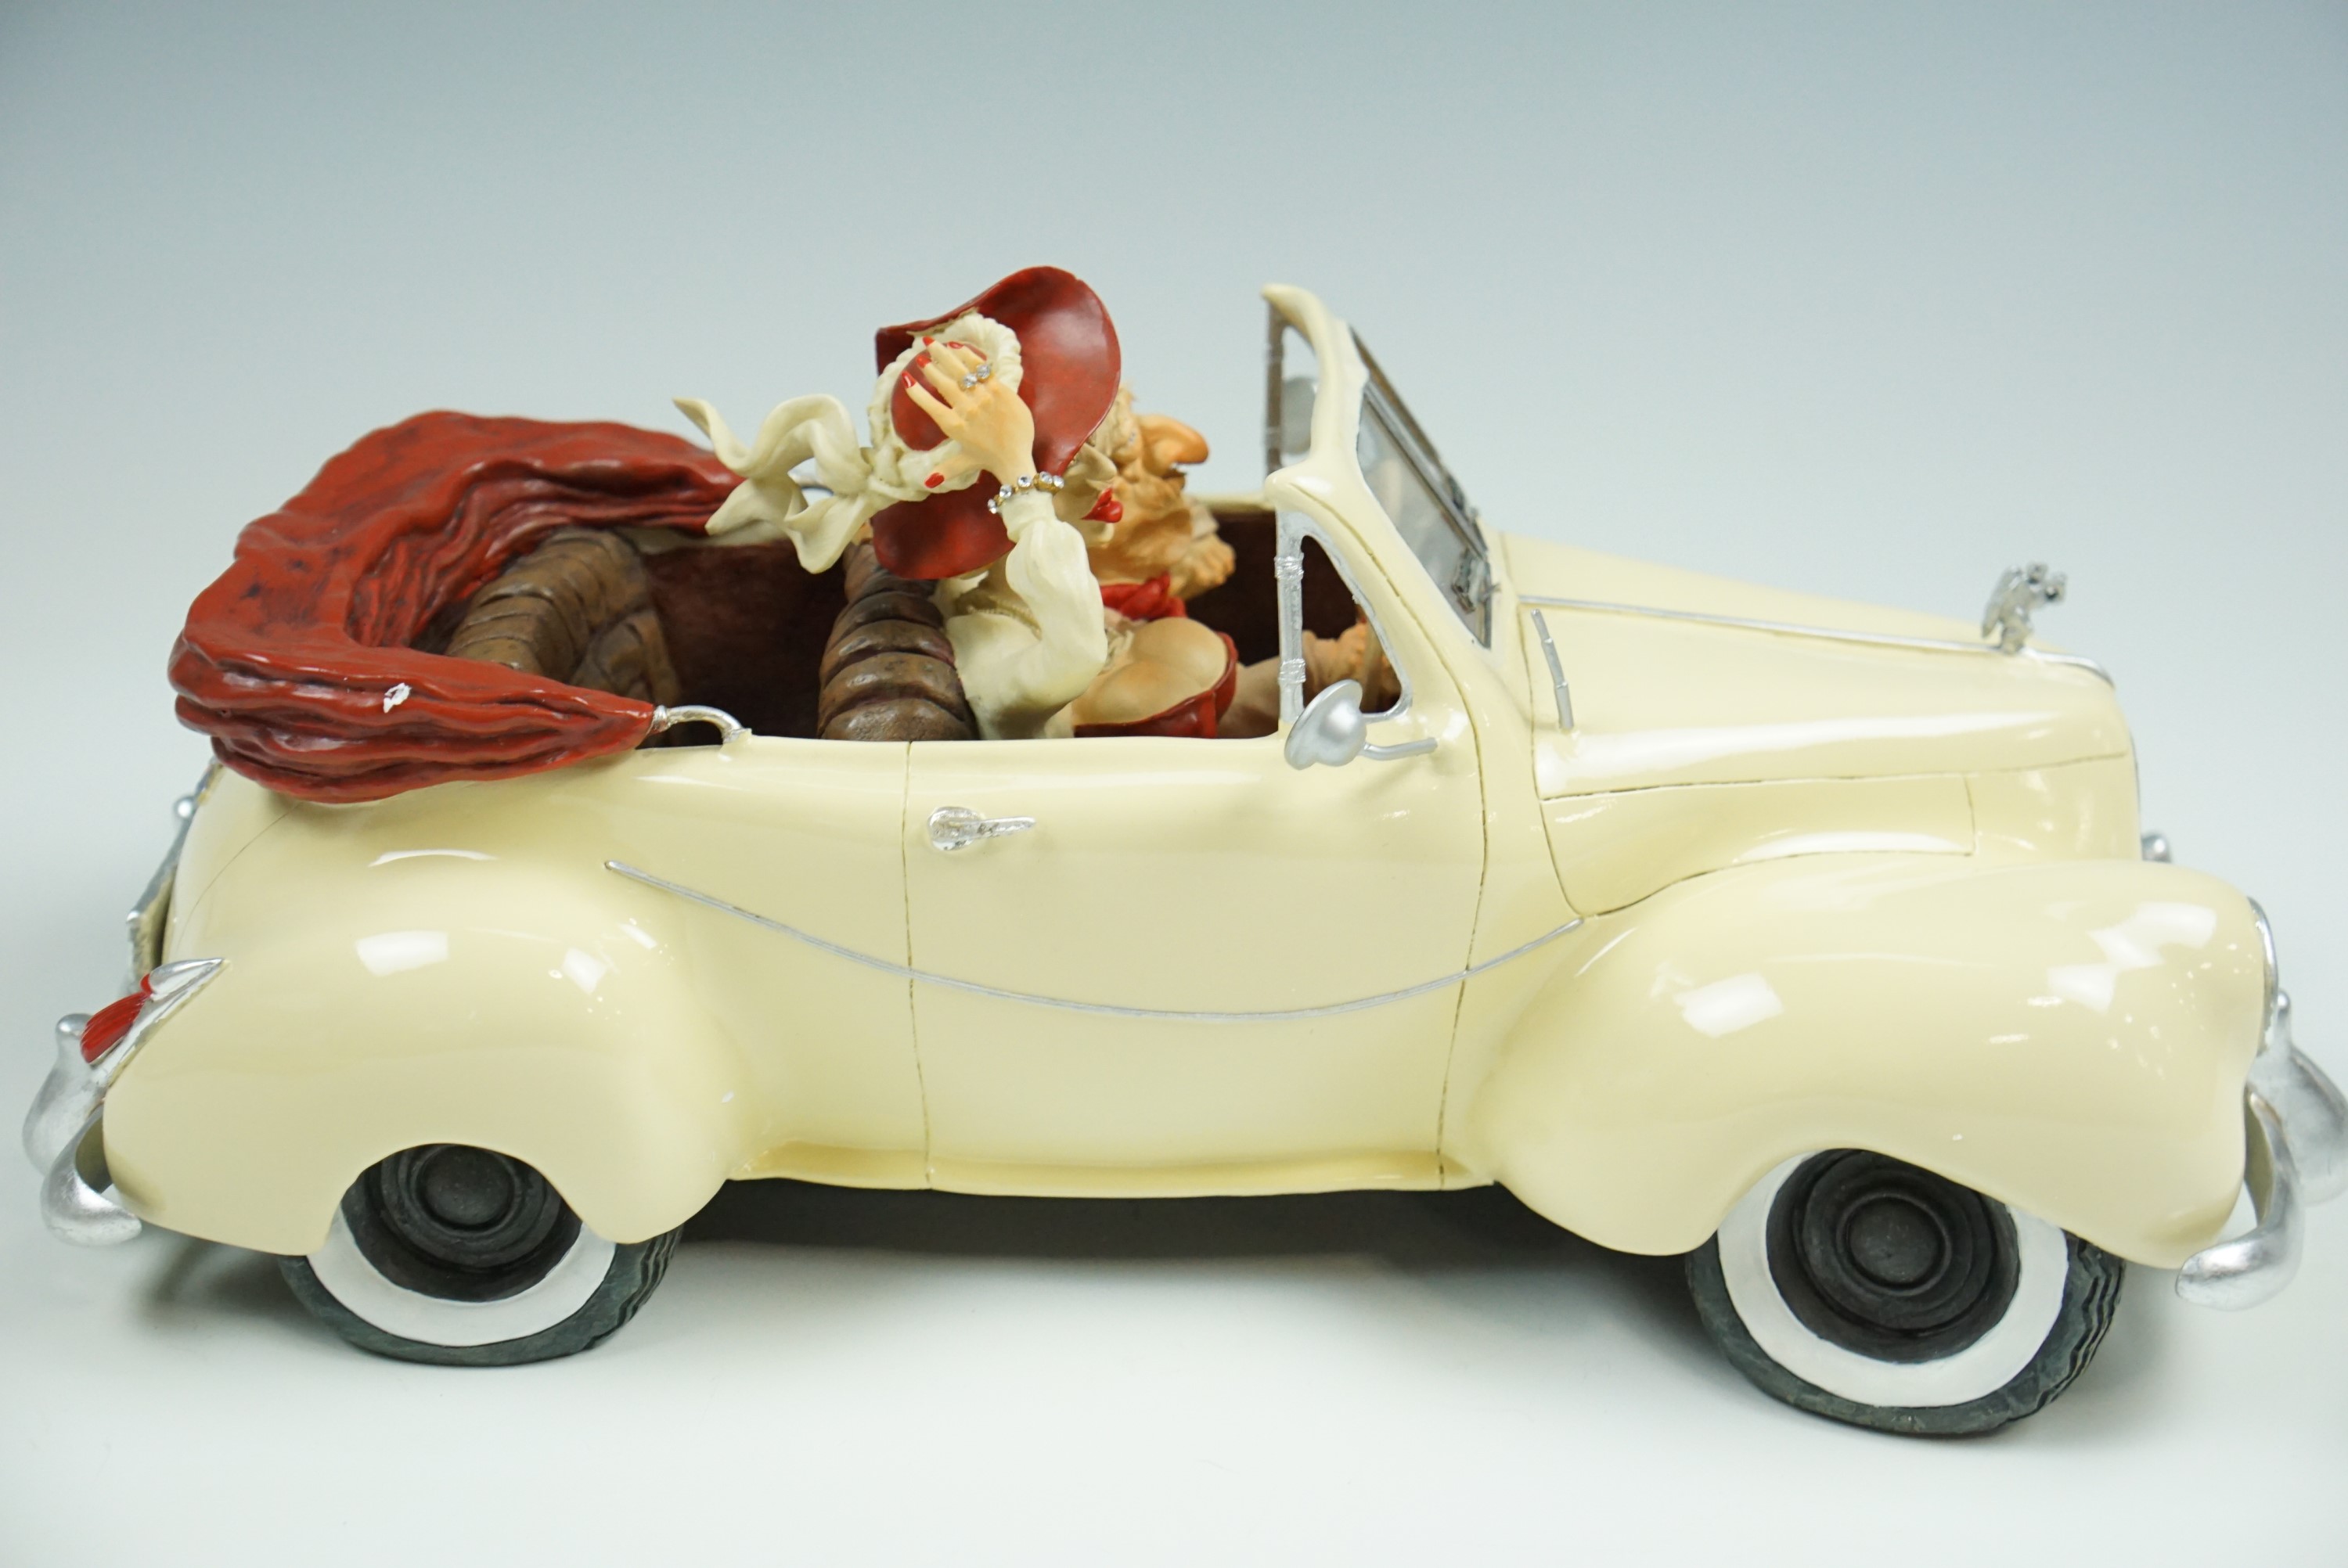 The comic art of Guillermo Forchino "Le Cabriolet", 35 cm long - Image 3 of 6